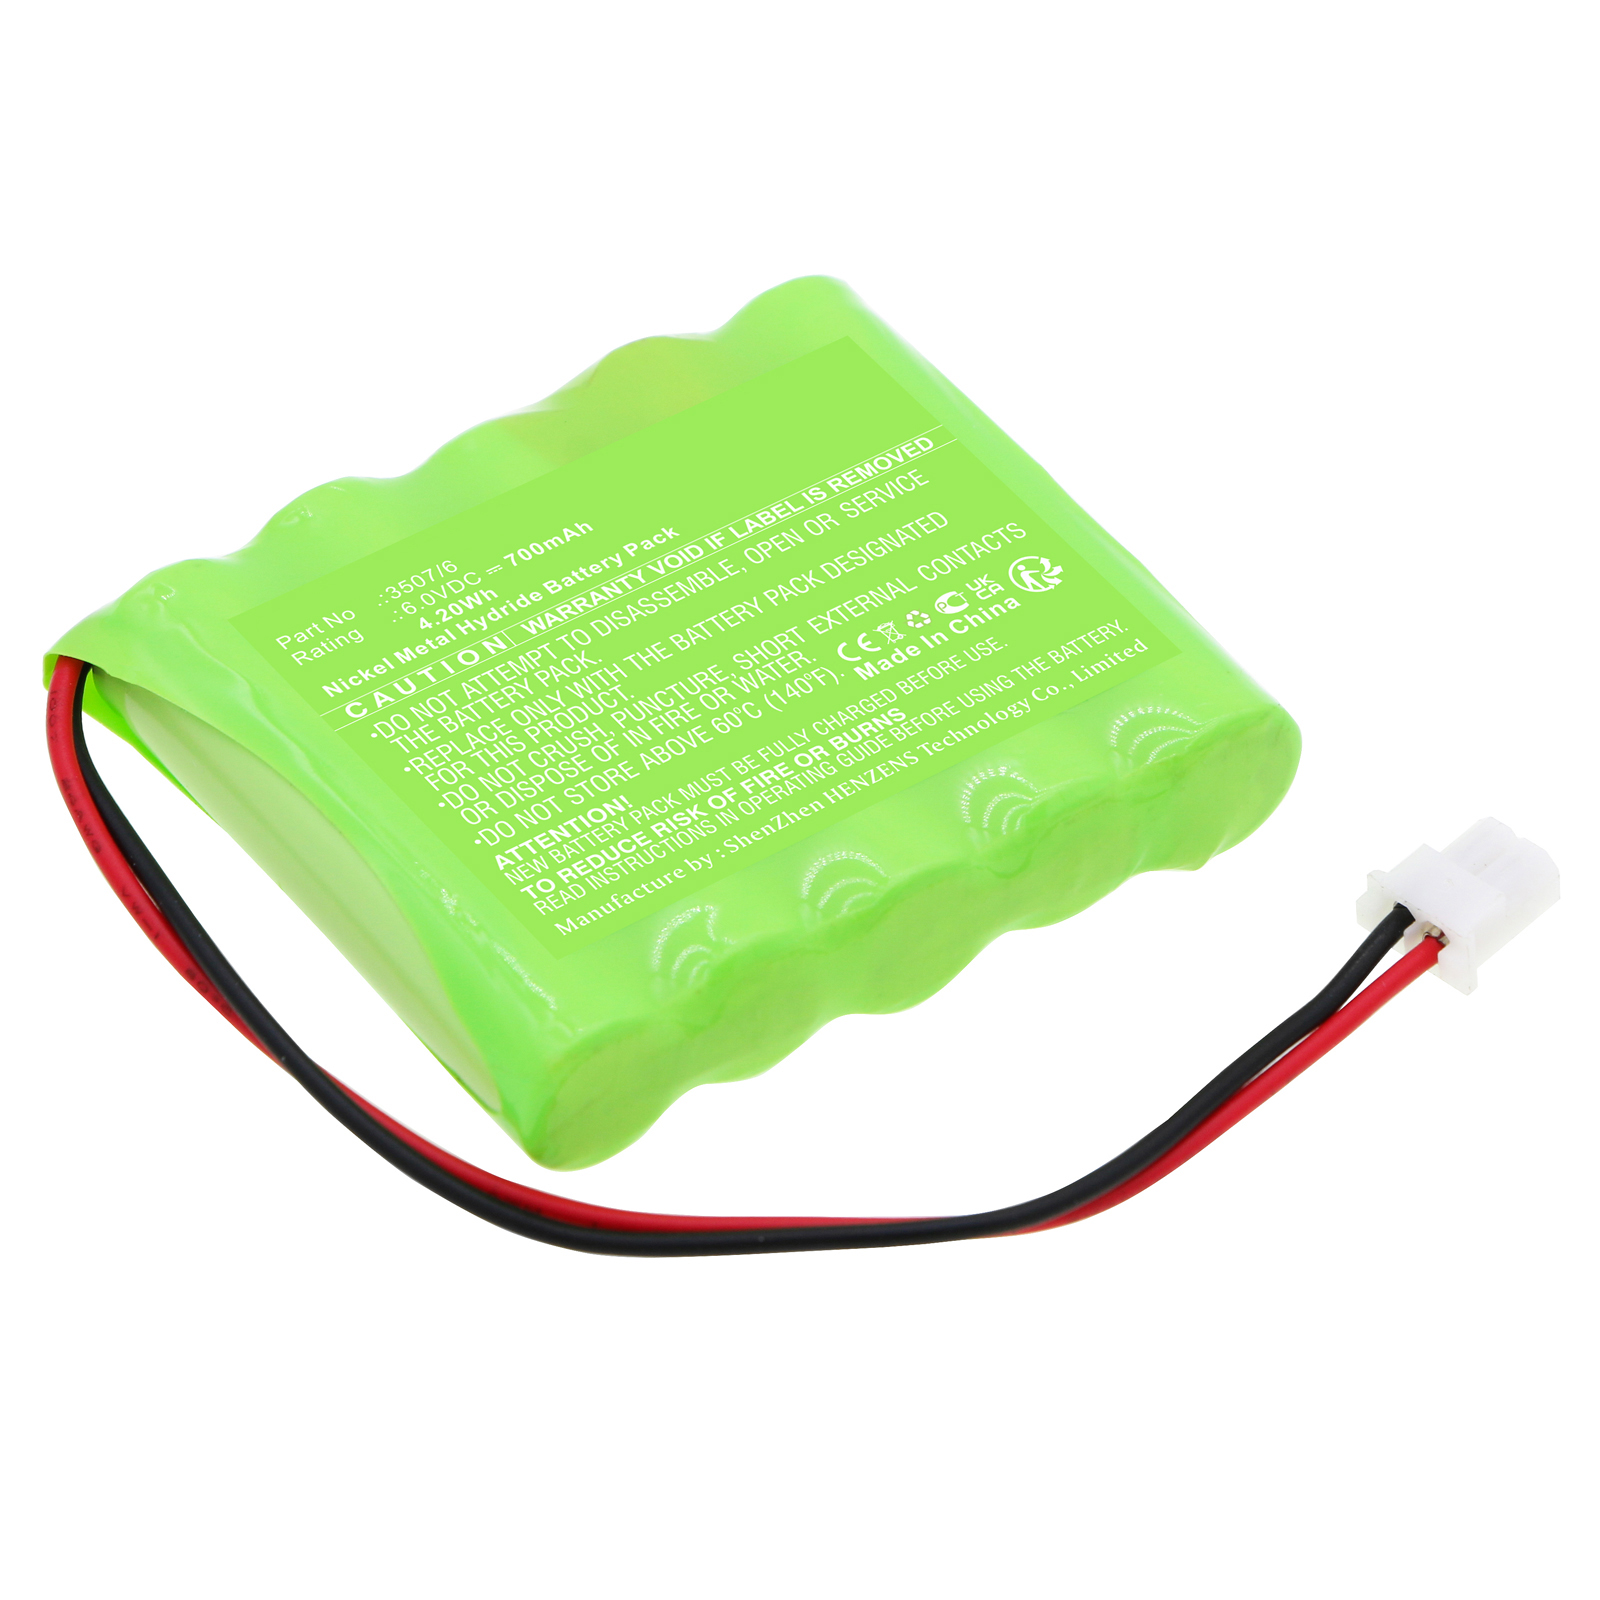 Synergy Digital Security and Safety Battery, Compatible with Bticino LD02430AA Security and Safety Battery (Ni-MH, 6V, 700mAh)